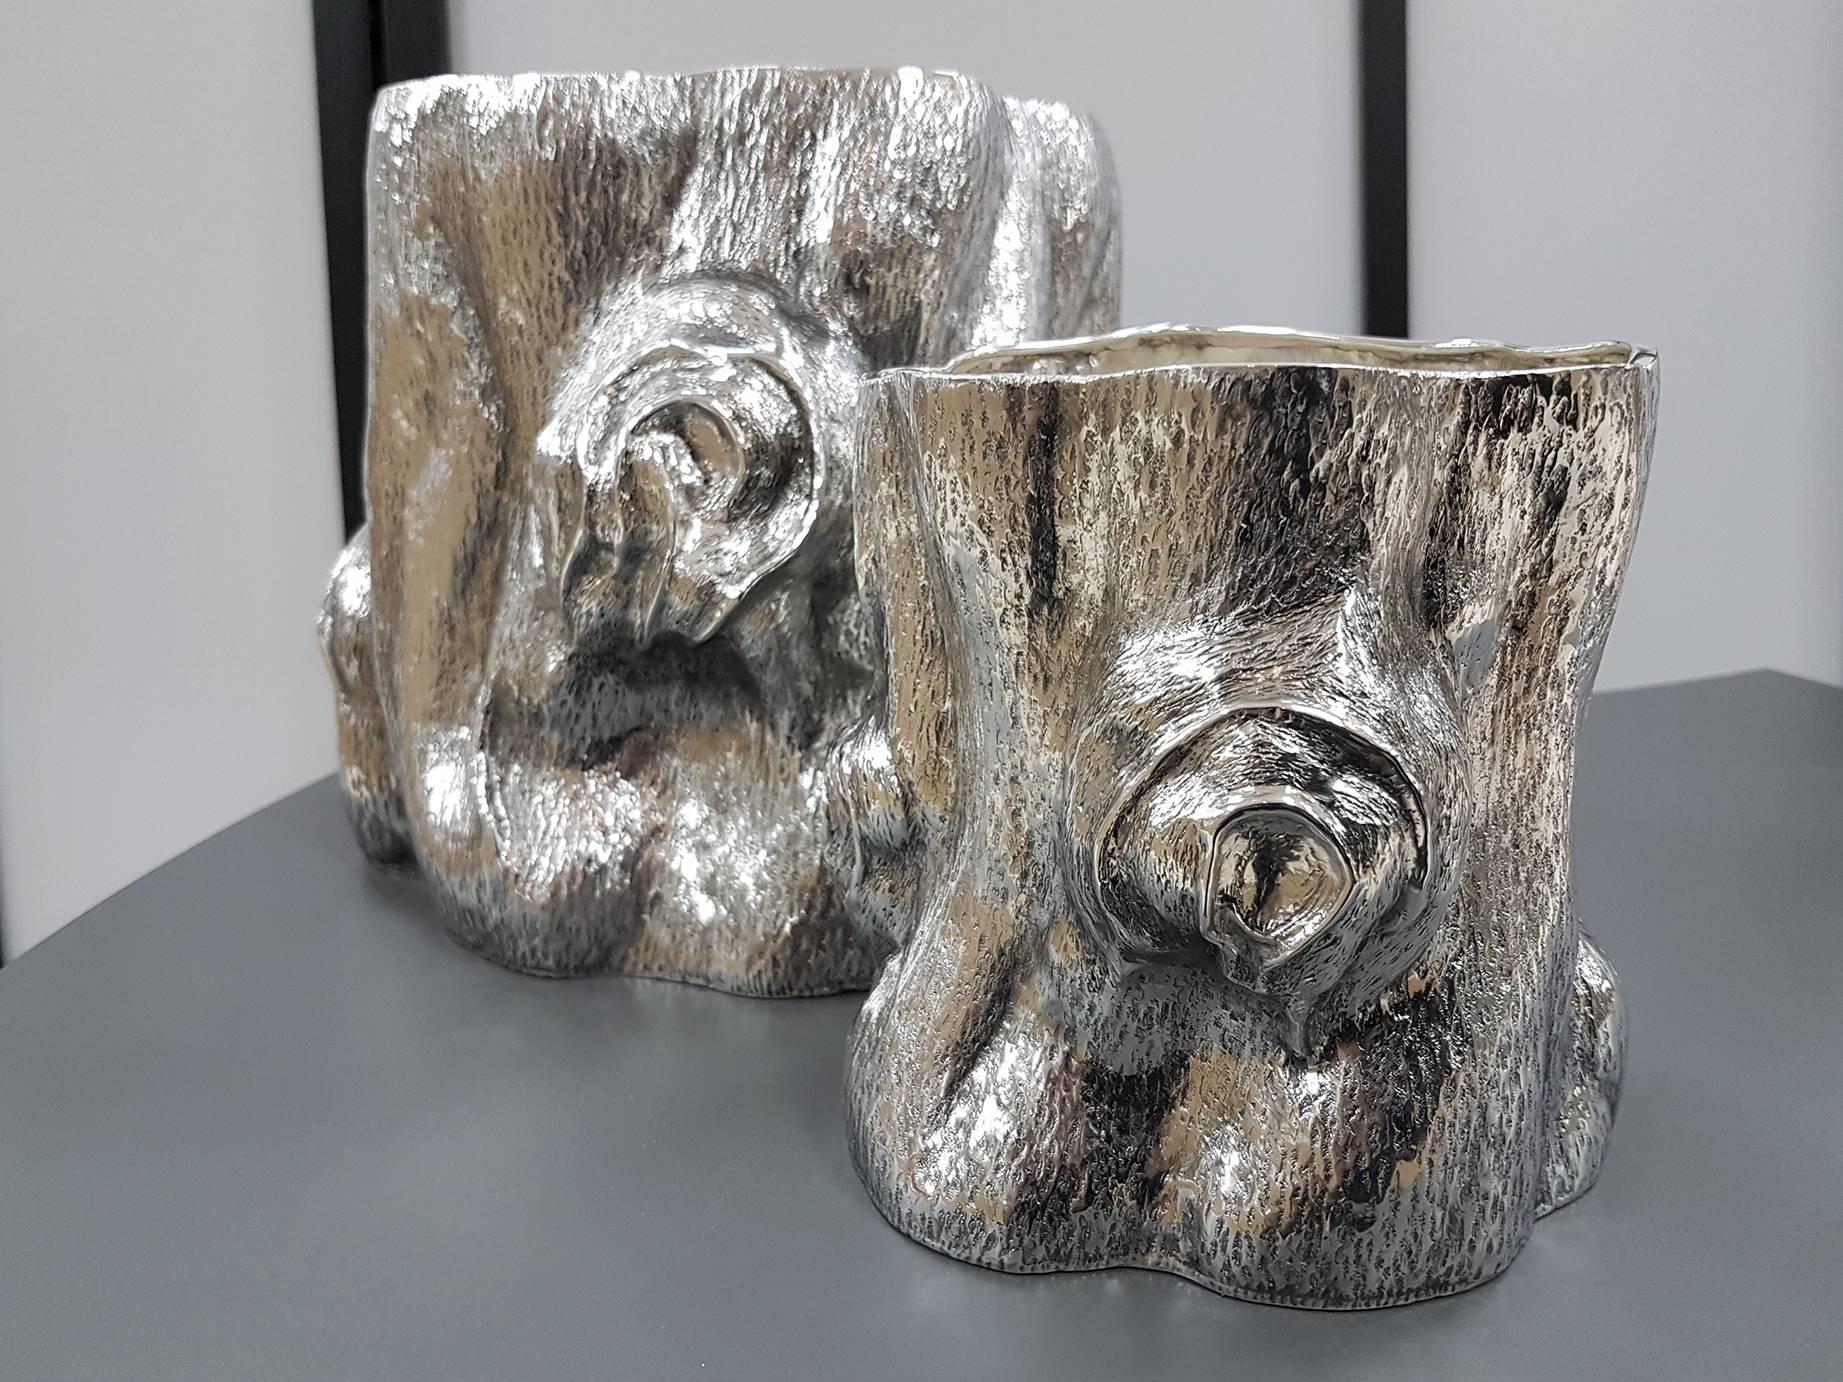 Ice bucket and champagne Set in solid silver in the shape of a tree trunk. The processing, chisel and embossing, was completely made by hand from a sterling silver sheet.

Ice bucket gr. 700 d. cm. 15 h. 14.5
Champagne bucket gr. 1,580 d.cm. 23 h. 20